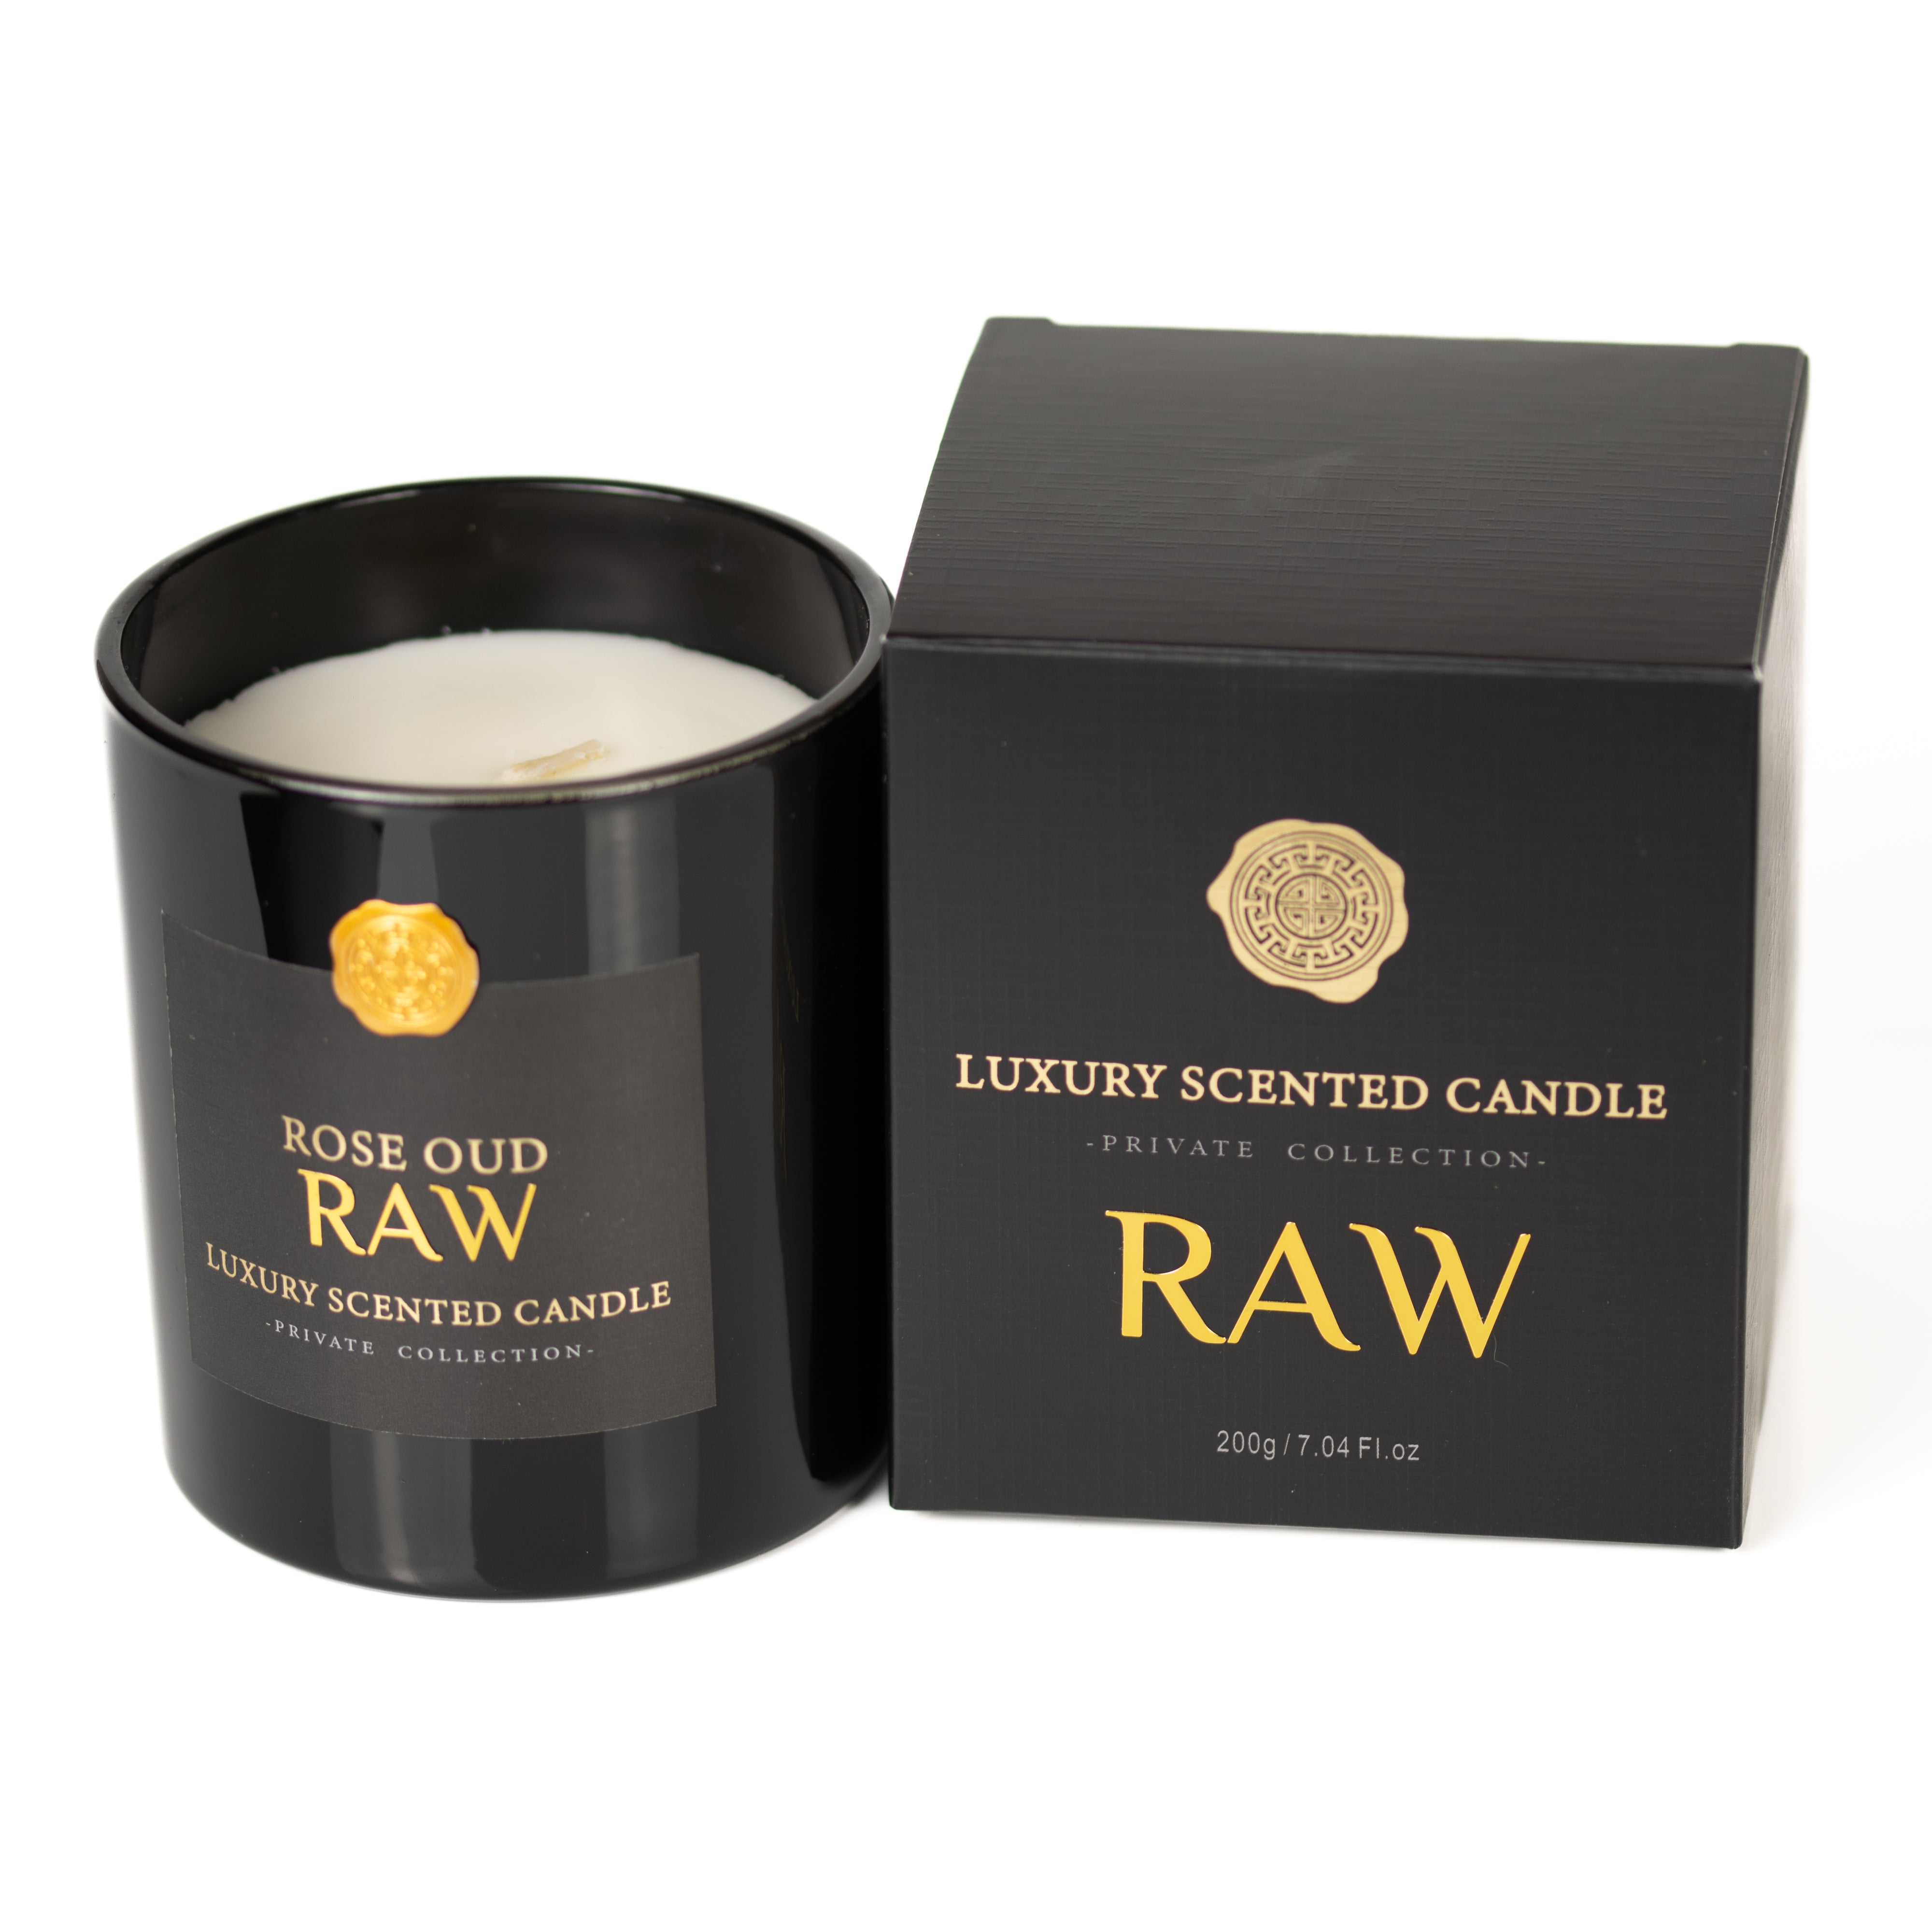 Premium Aromatherapy Soy Wax Gift Candle in Rose Oudh for Focus & Meditation